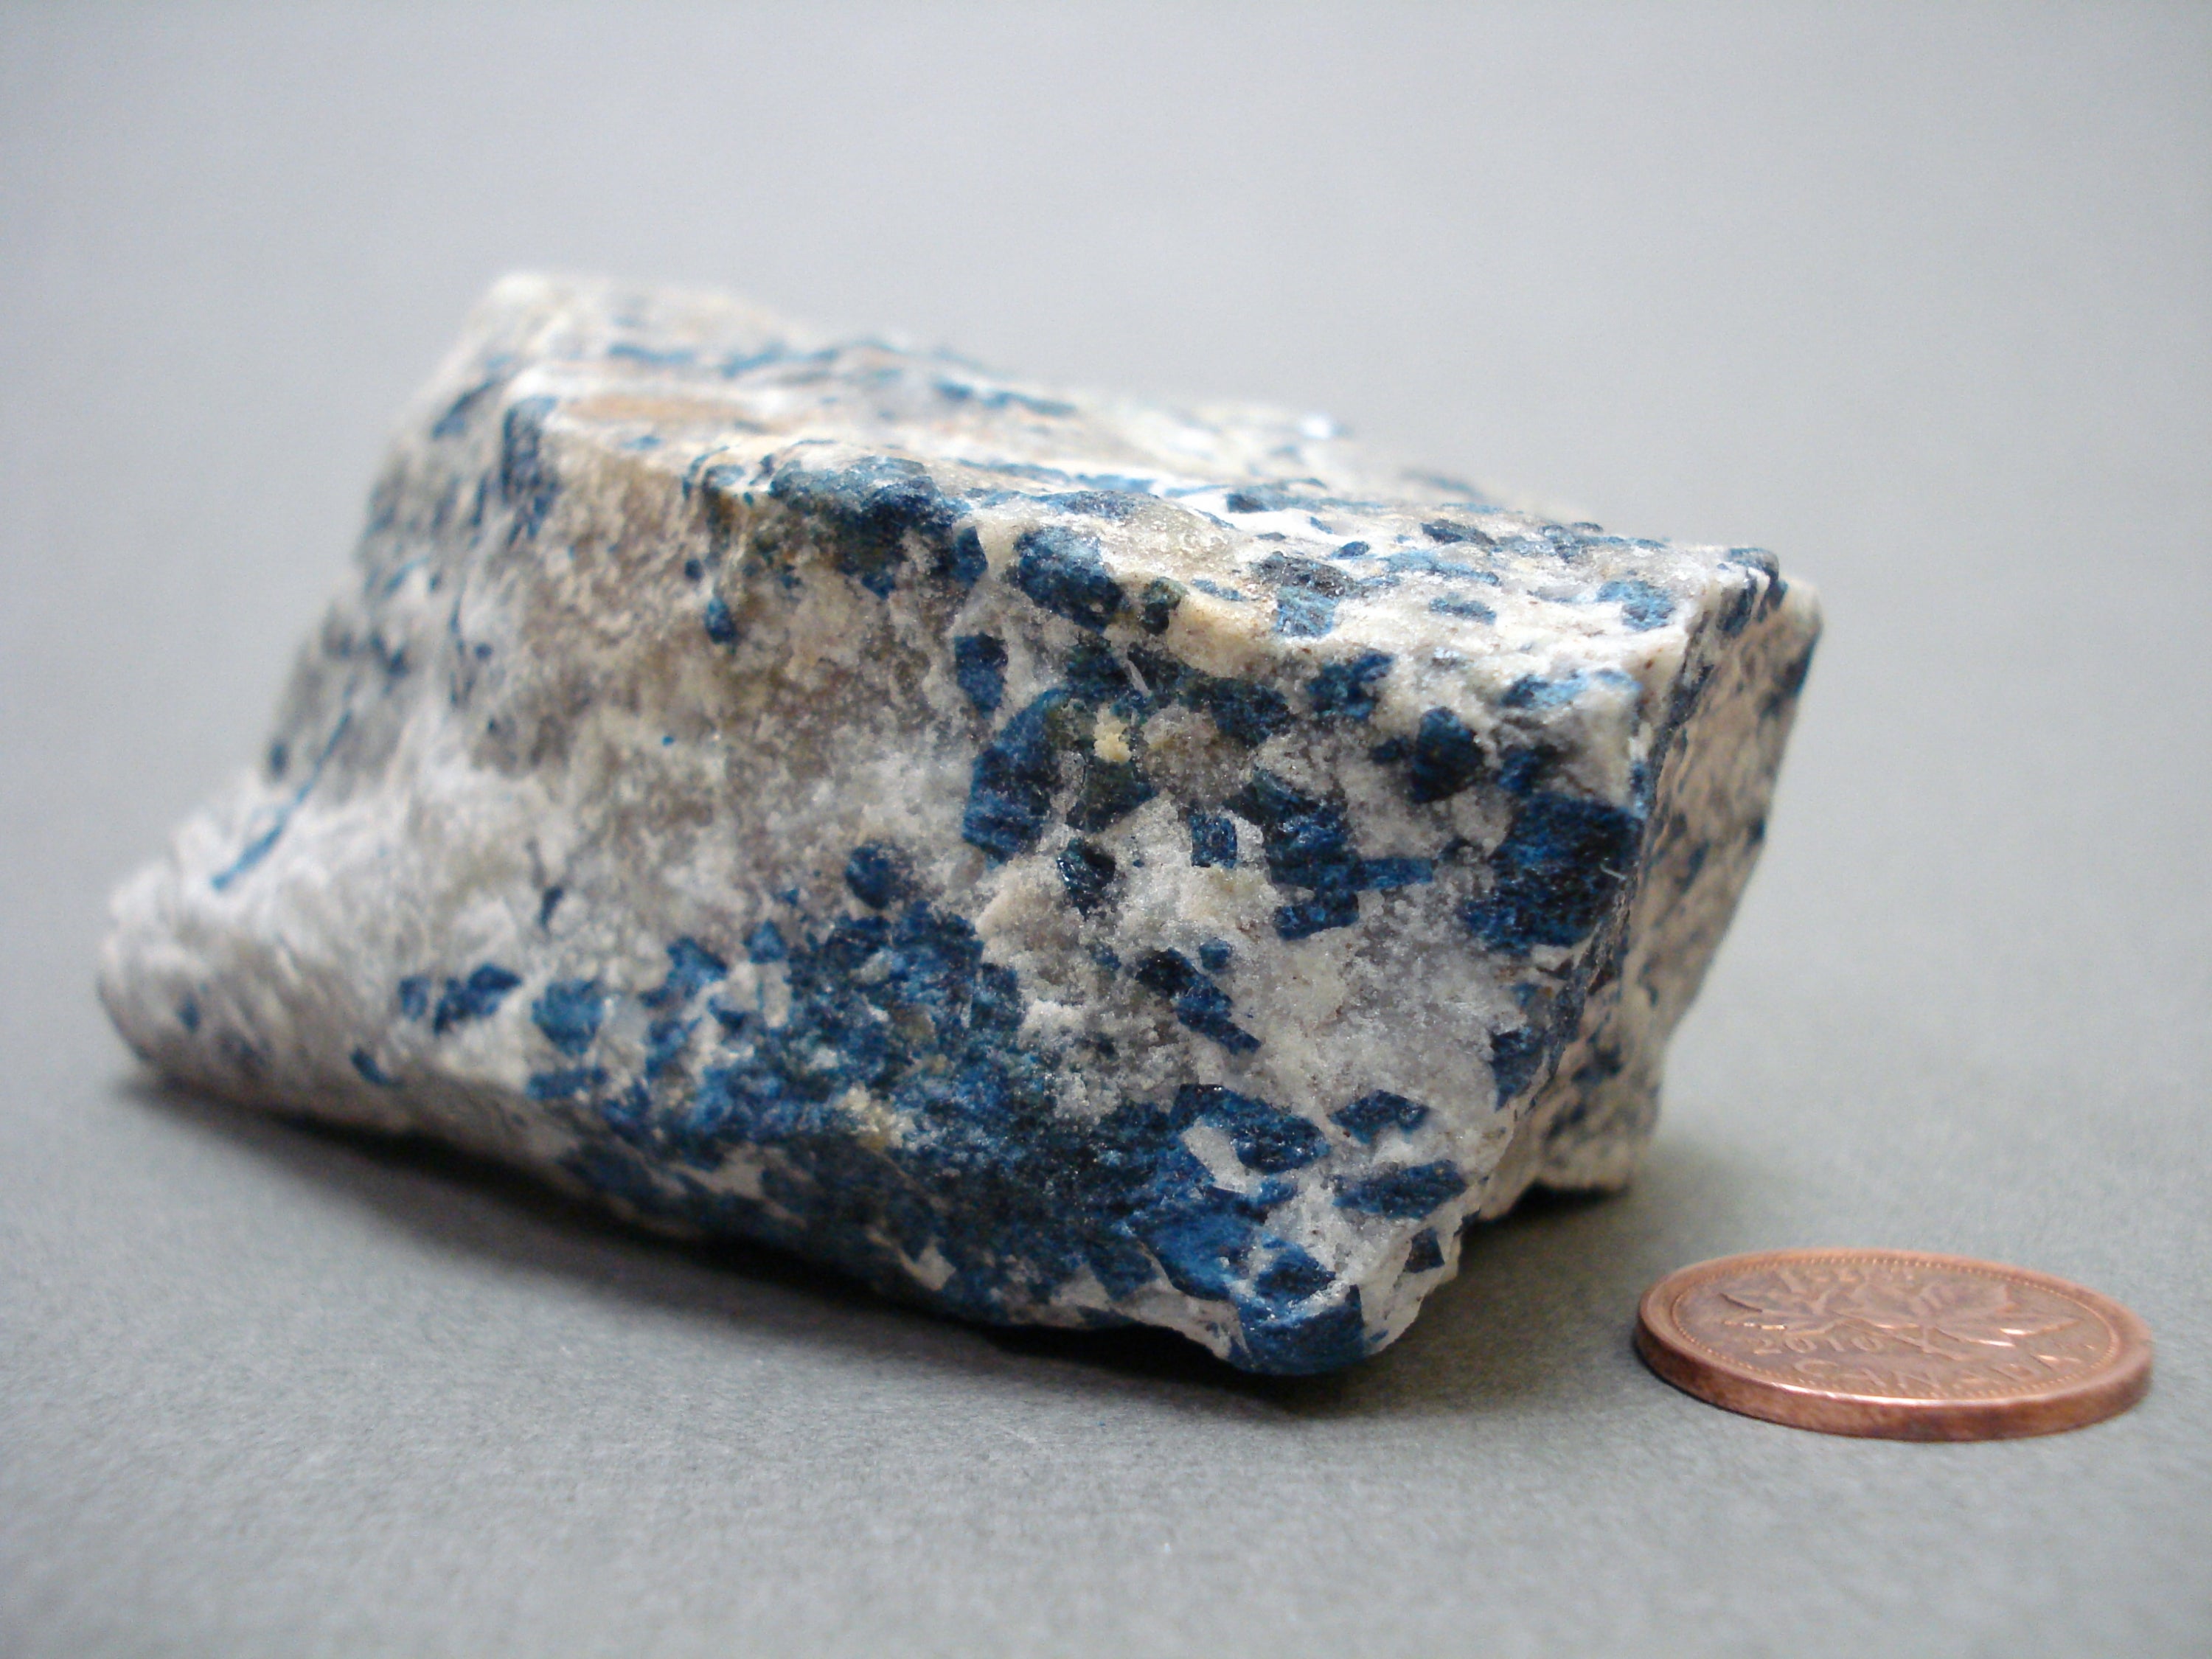 Lazulite next to a penny for size comparison